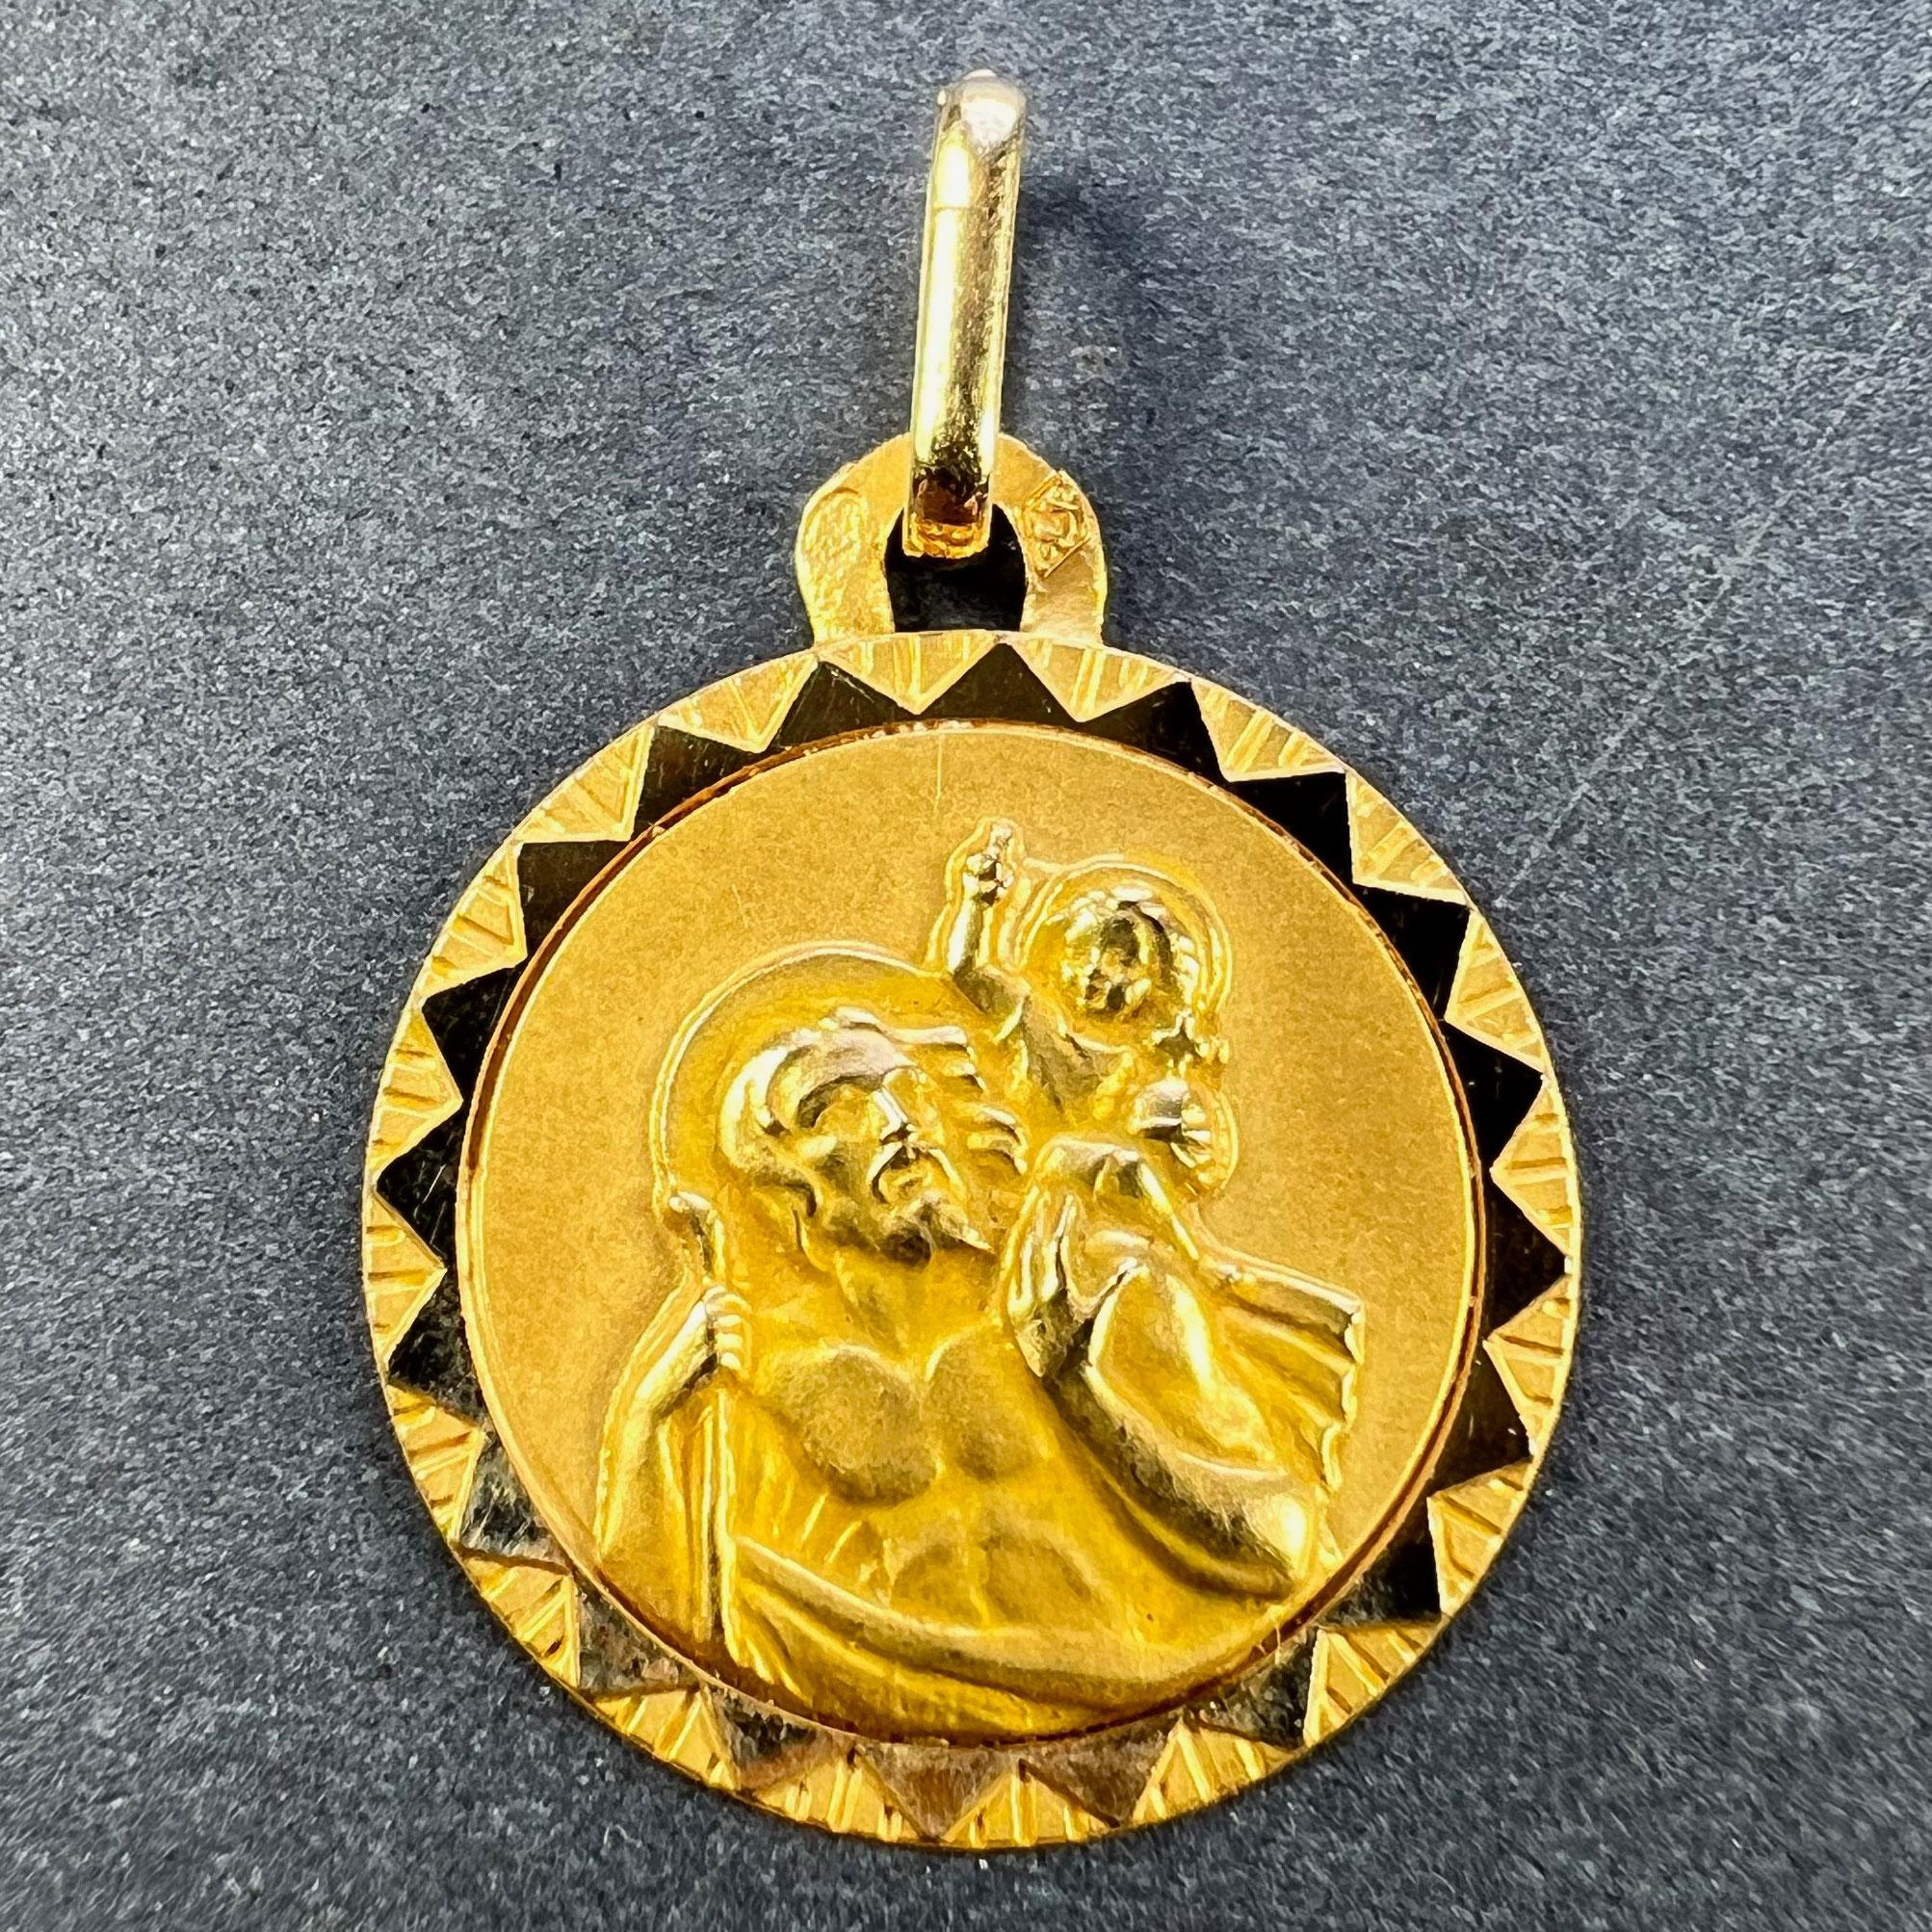 A French 18 karat (18K) yellow gold charm pendant designed as a medal depicting St Christopher as he carries the infant Christ across a river within a sunburst frame of polished and textured gold. Stamped with the eagle’s head for French manufacture